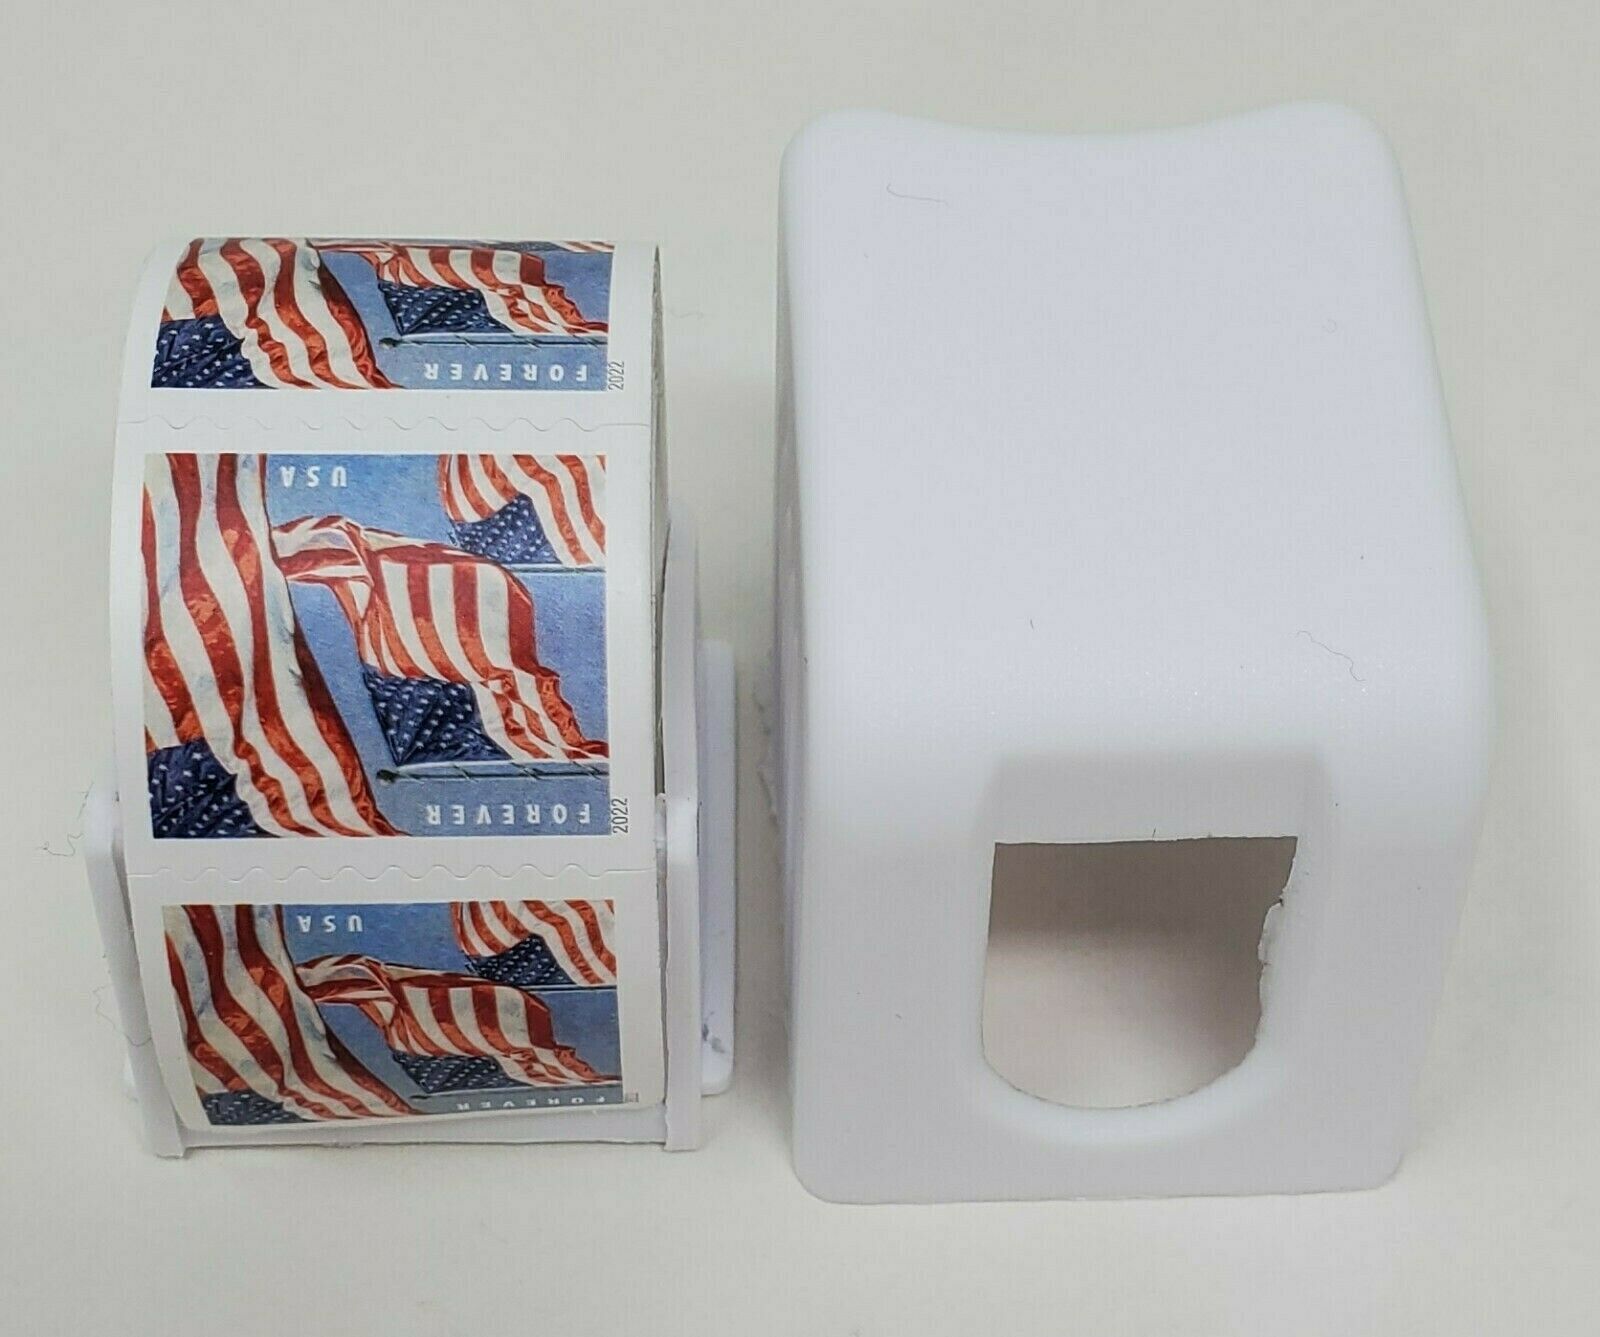 Free: TWO Rolls of 100 USPS Forever Stamps ($132 value) - Stamps -   Auctions for Free Stuff